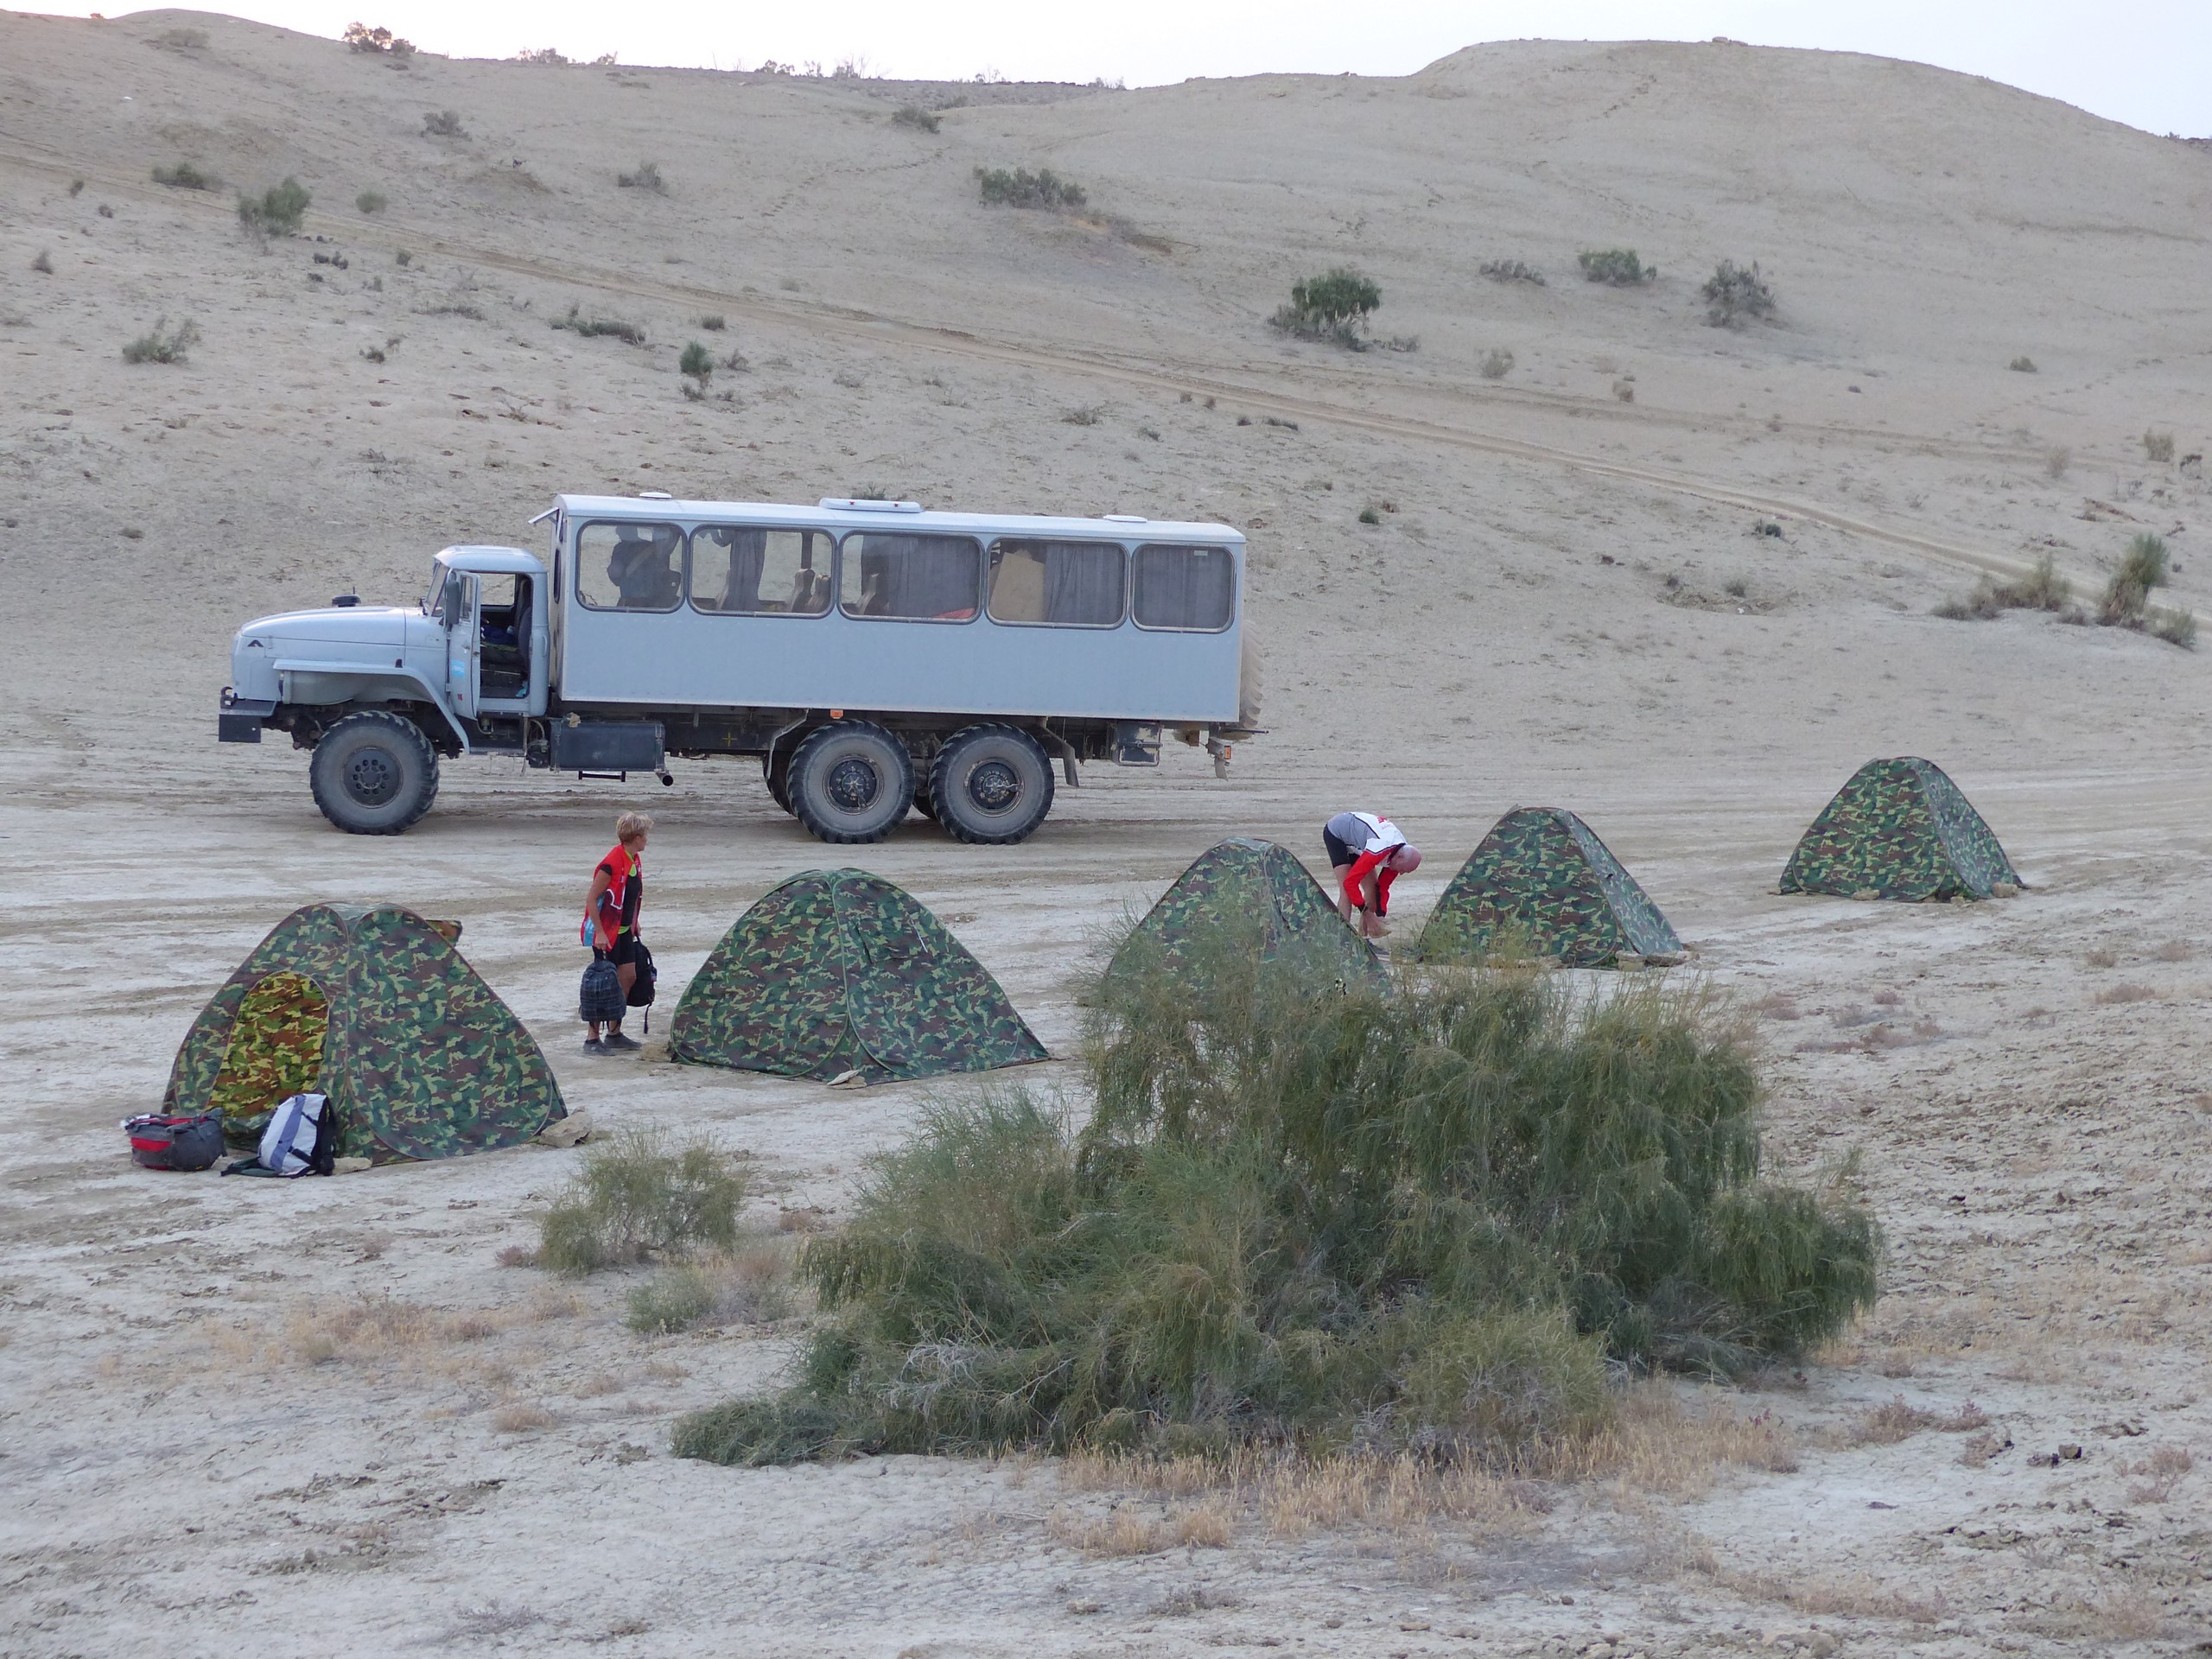 Camping along the road in Uzbekistan